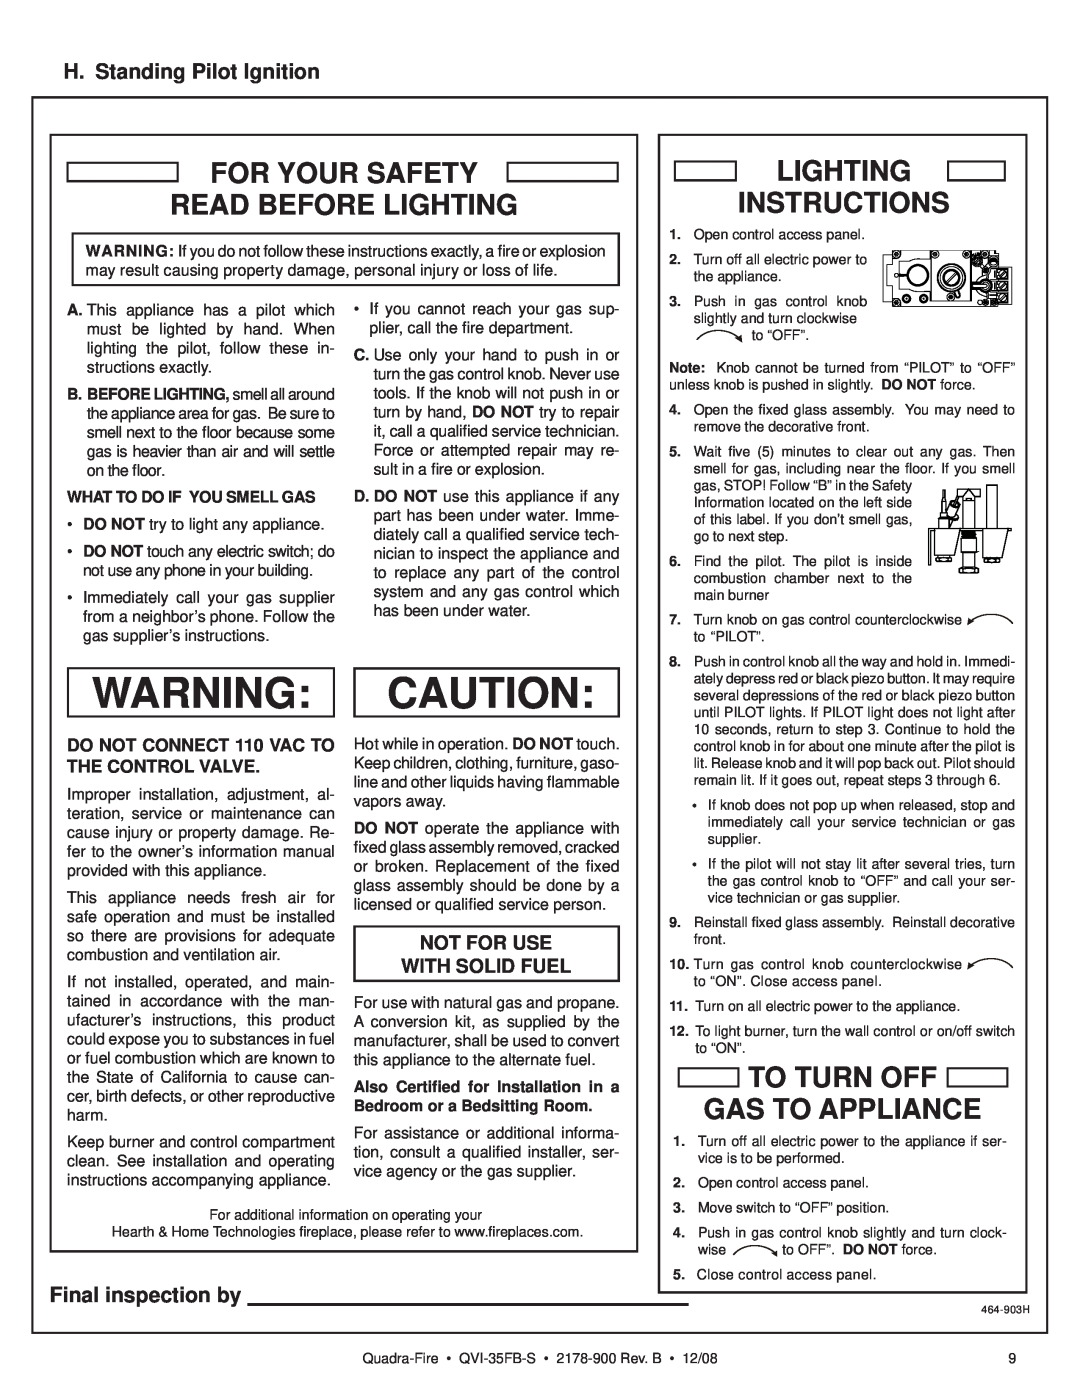 Quadra-Fire QVI-35FB-S For Your Safety Read Before Lighting, Lighting Instructions, To Turn Off Gas To Appliance 